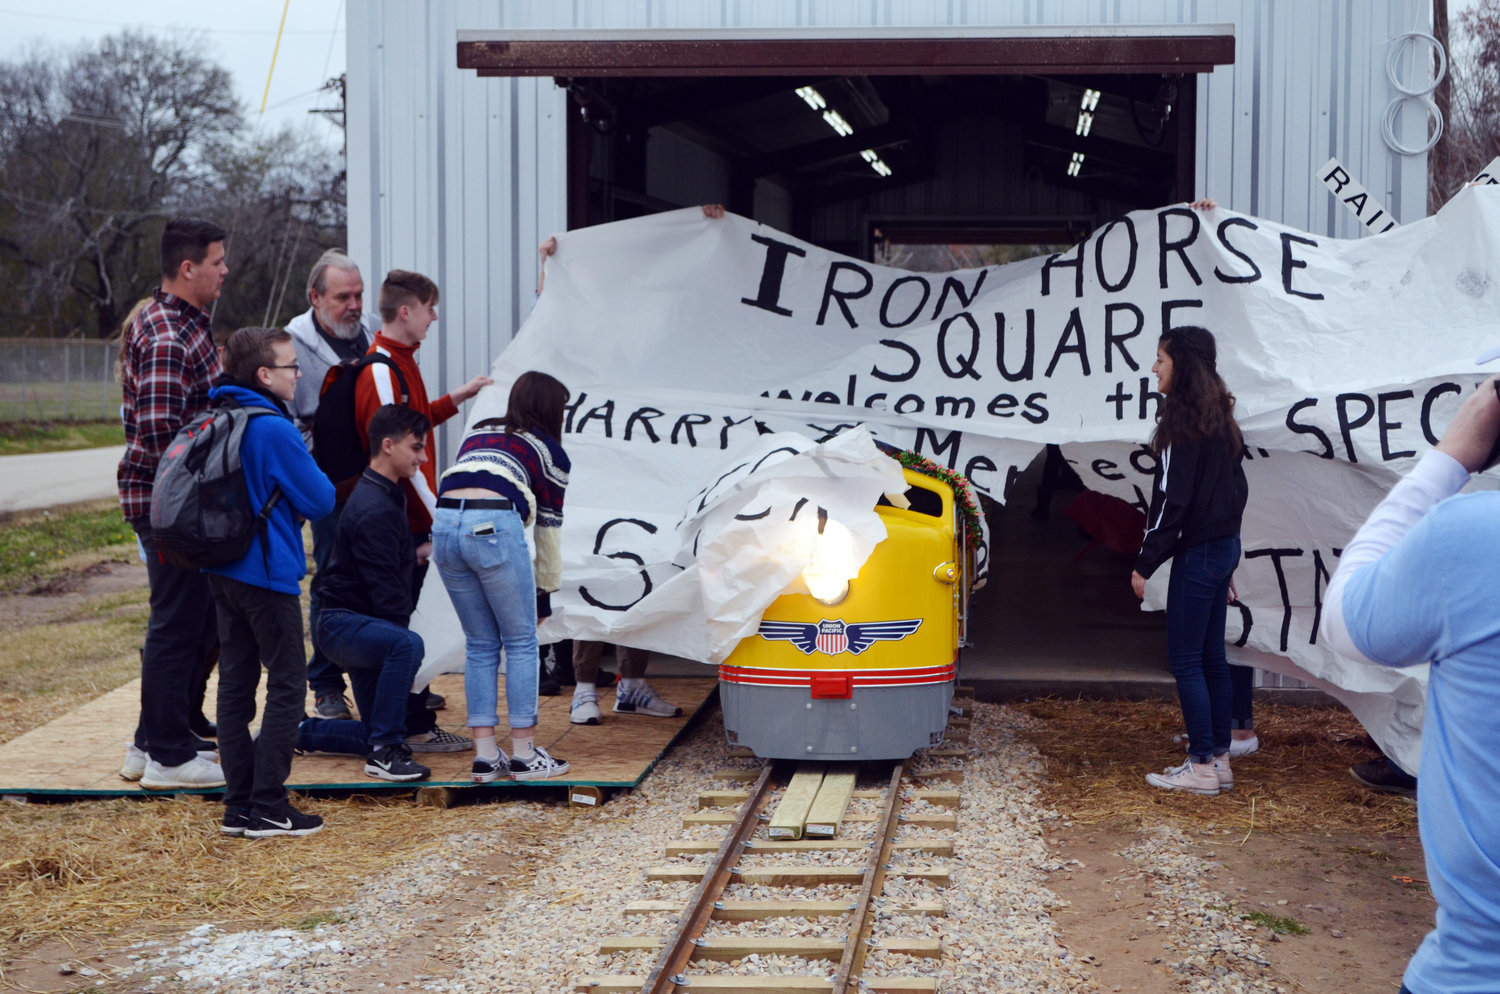 The Harry Meredith Special bursts through a giant paper sign last week as it emerges from Steck Station to make its maiden journey at Iron Horse Square Park in Mineola.